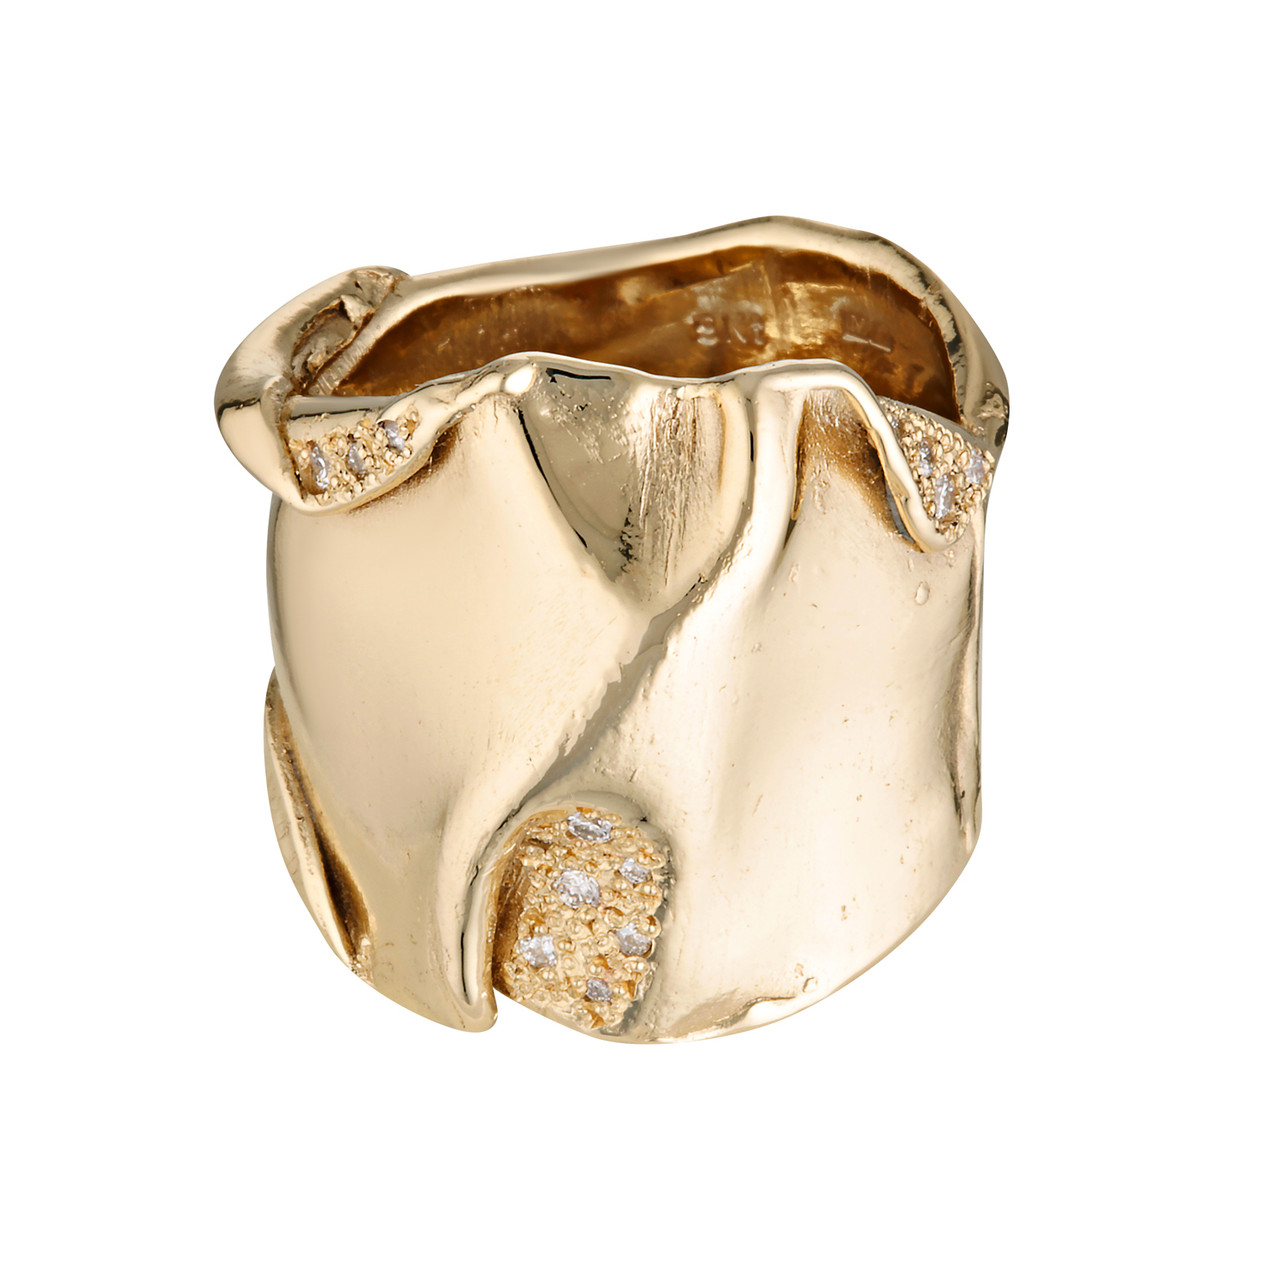 Athena Gold Textured Wide Ring, Mia Chicco, tomfoolery